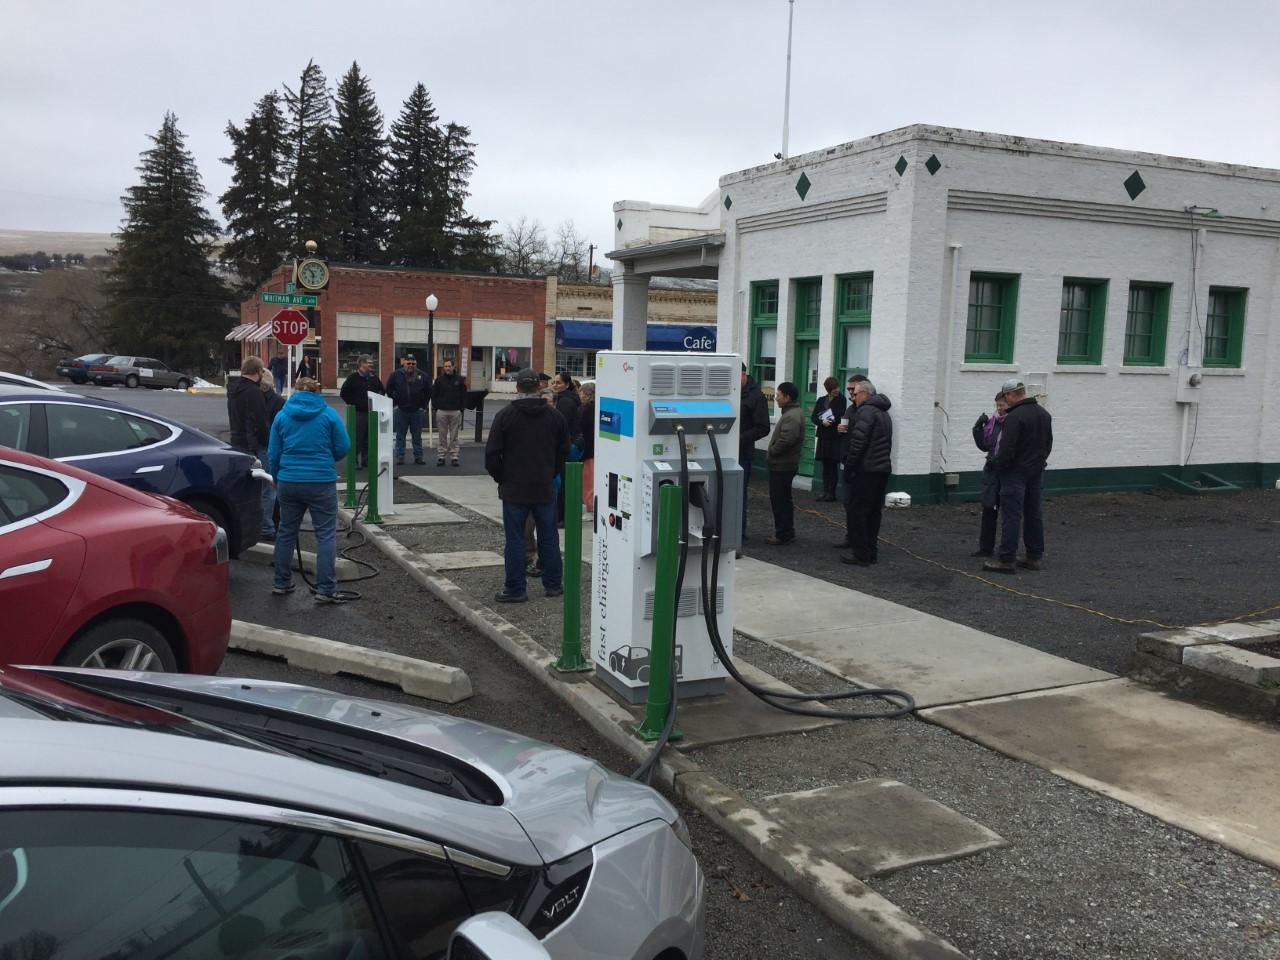 Avista Works to Build Electric Vehicle Charging Infrastructure